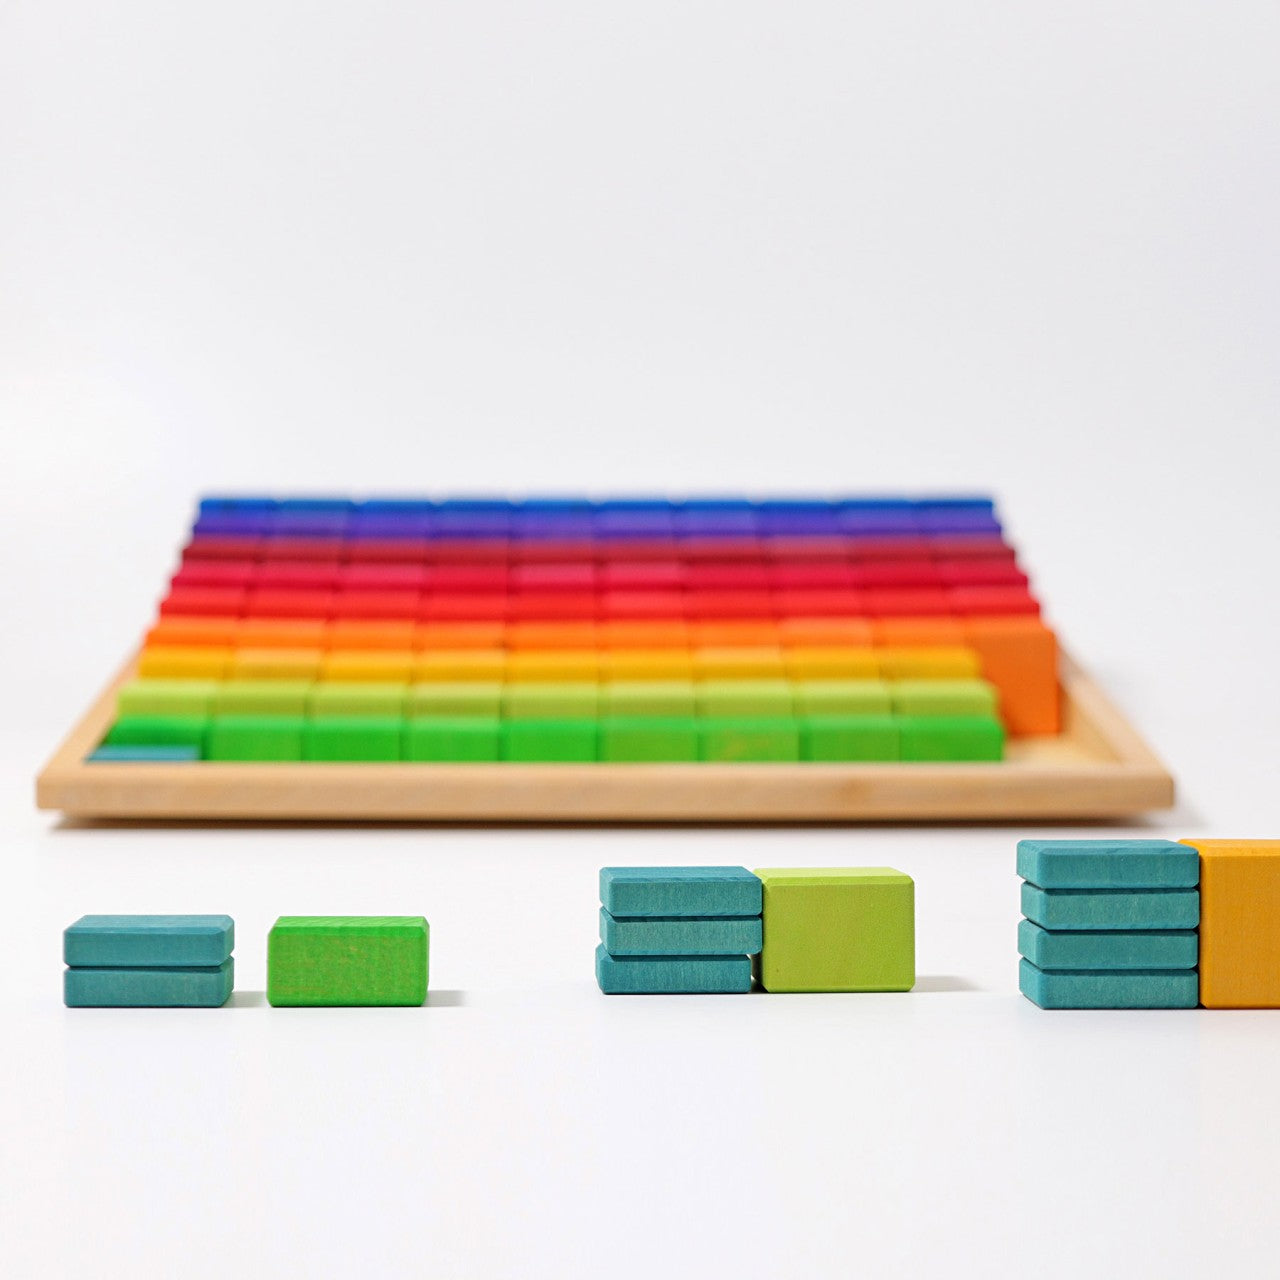 Grimm's - Large Stepped Counting Blocks